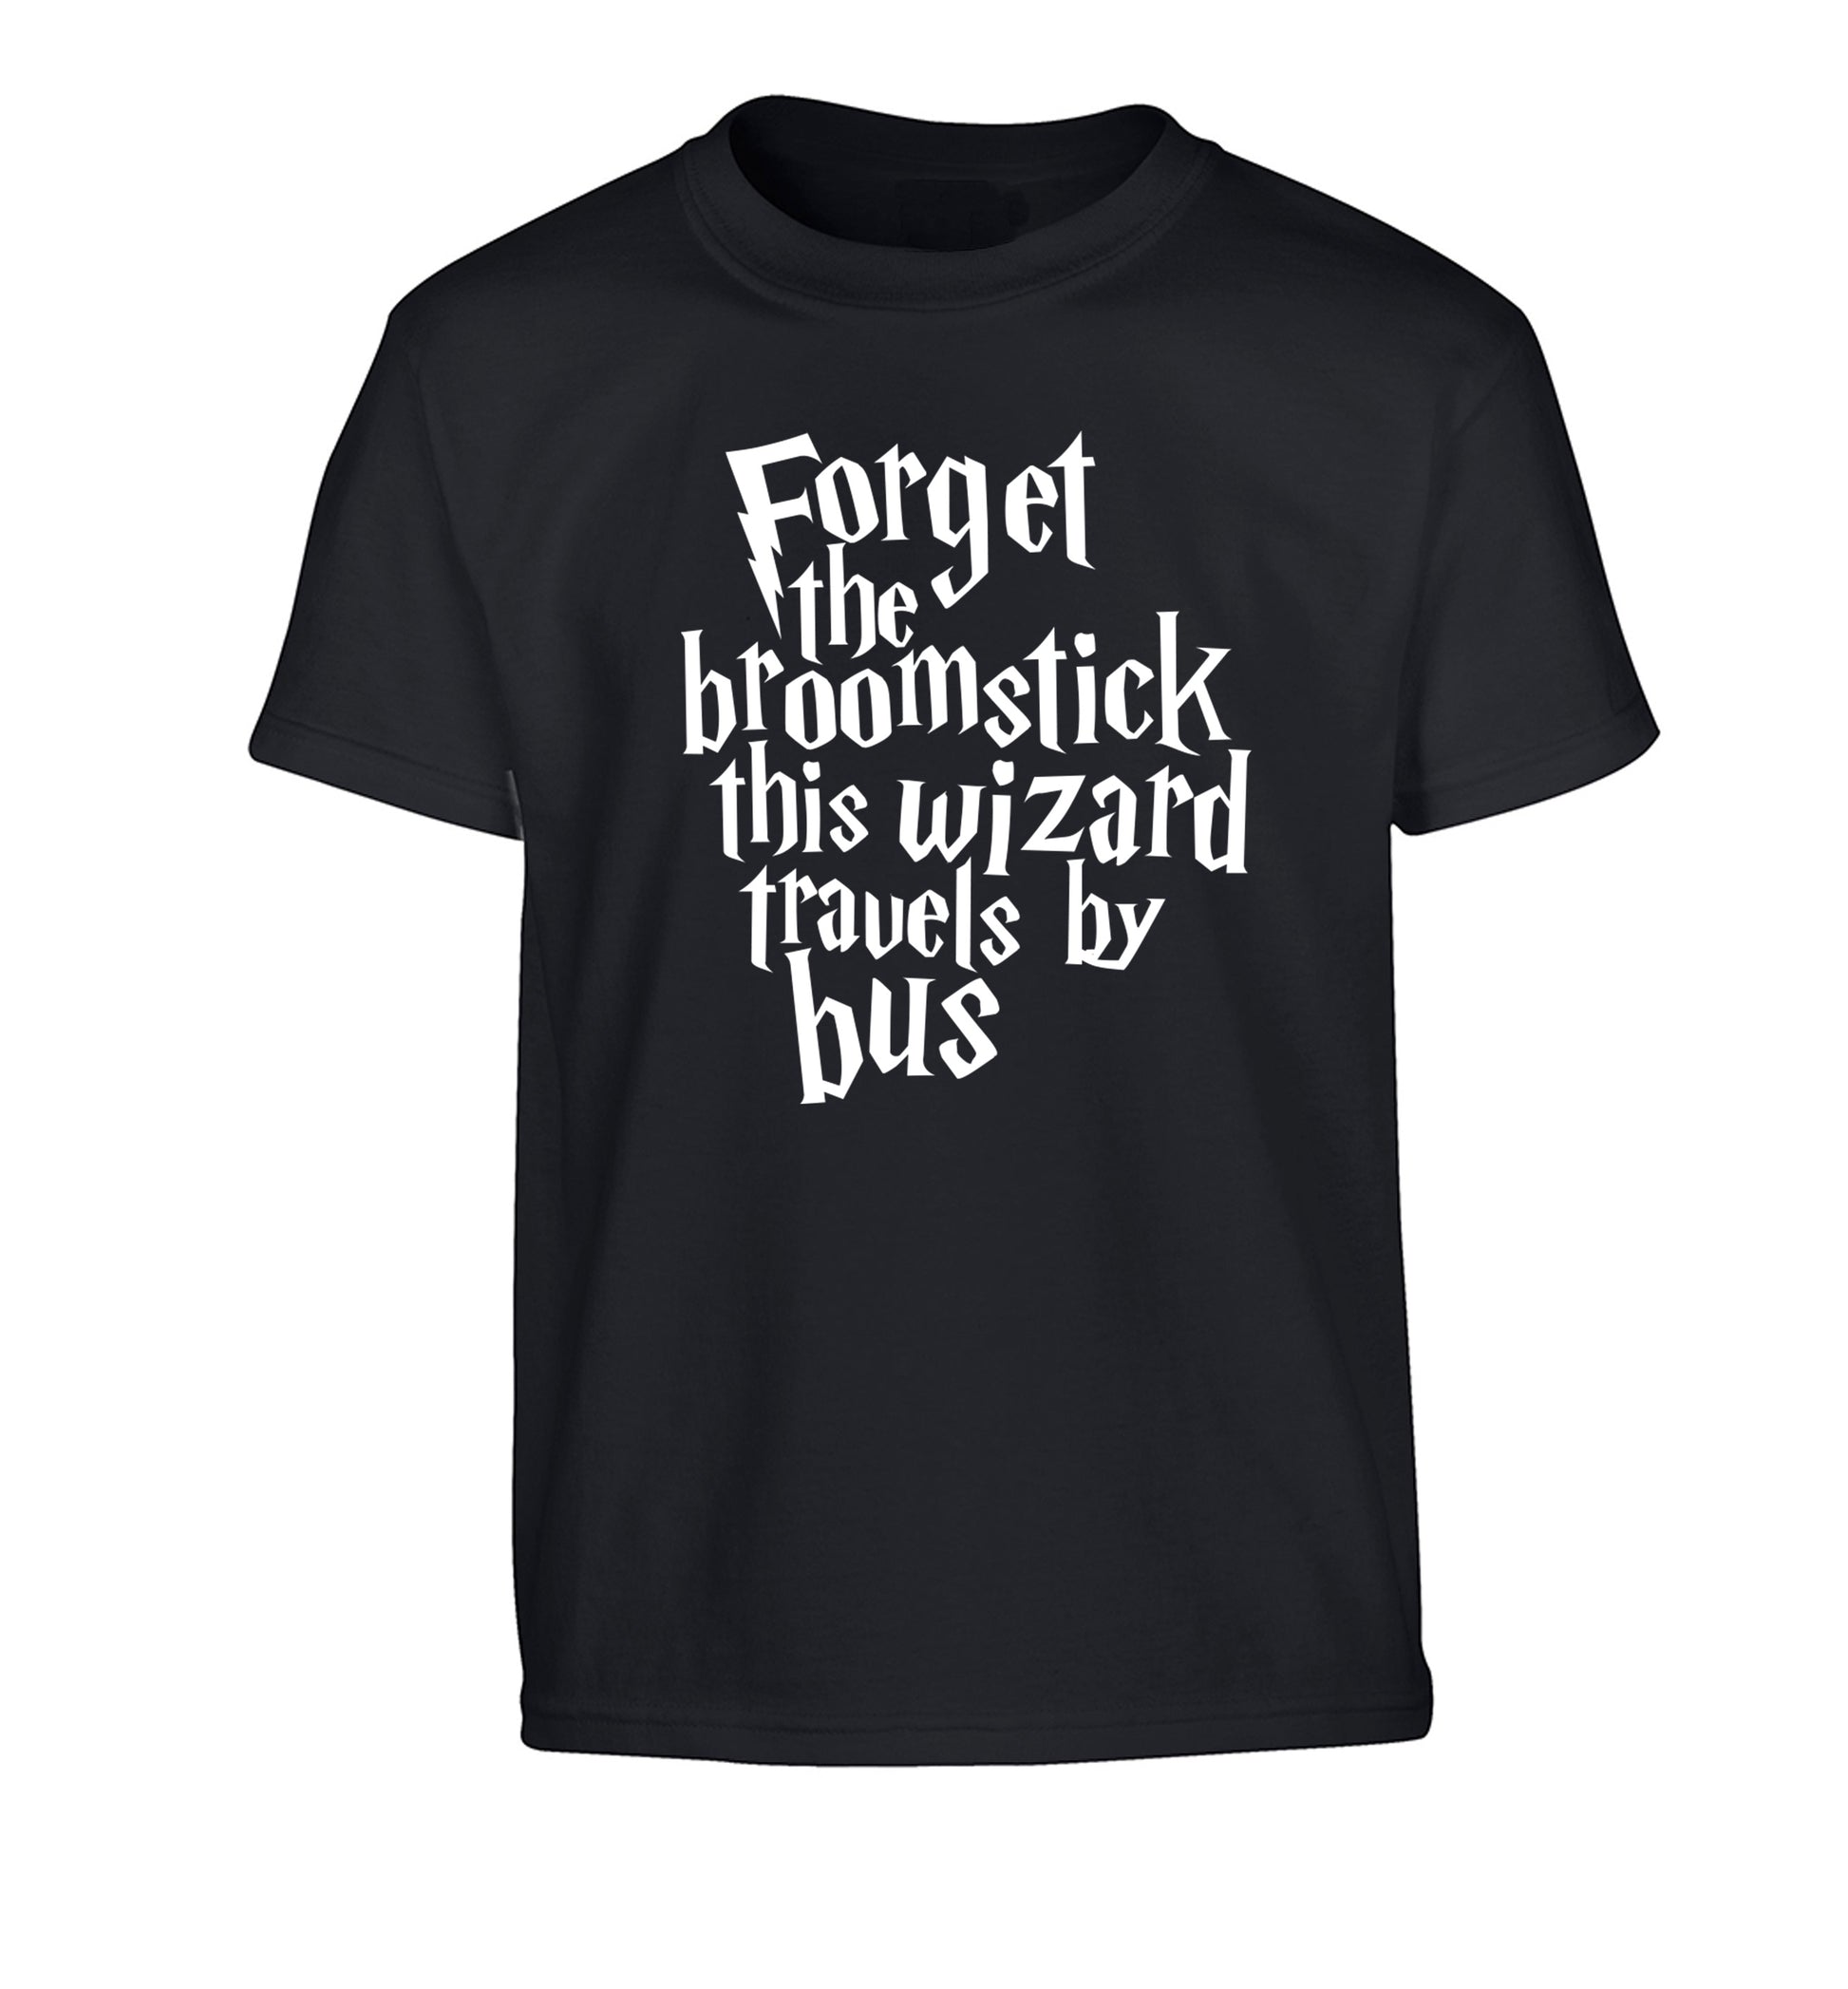 Forget the broomstick this wizard travels by bus Children's black Tshirt 12-14 Years